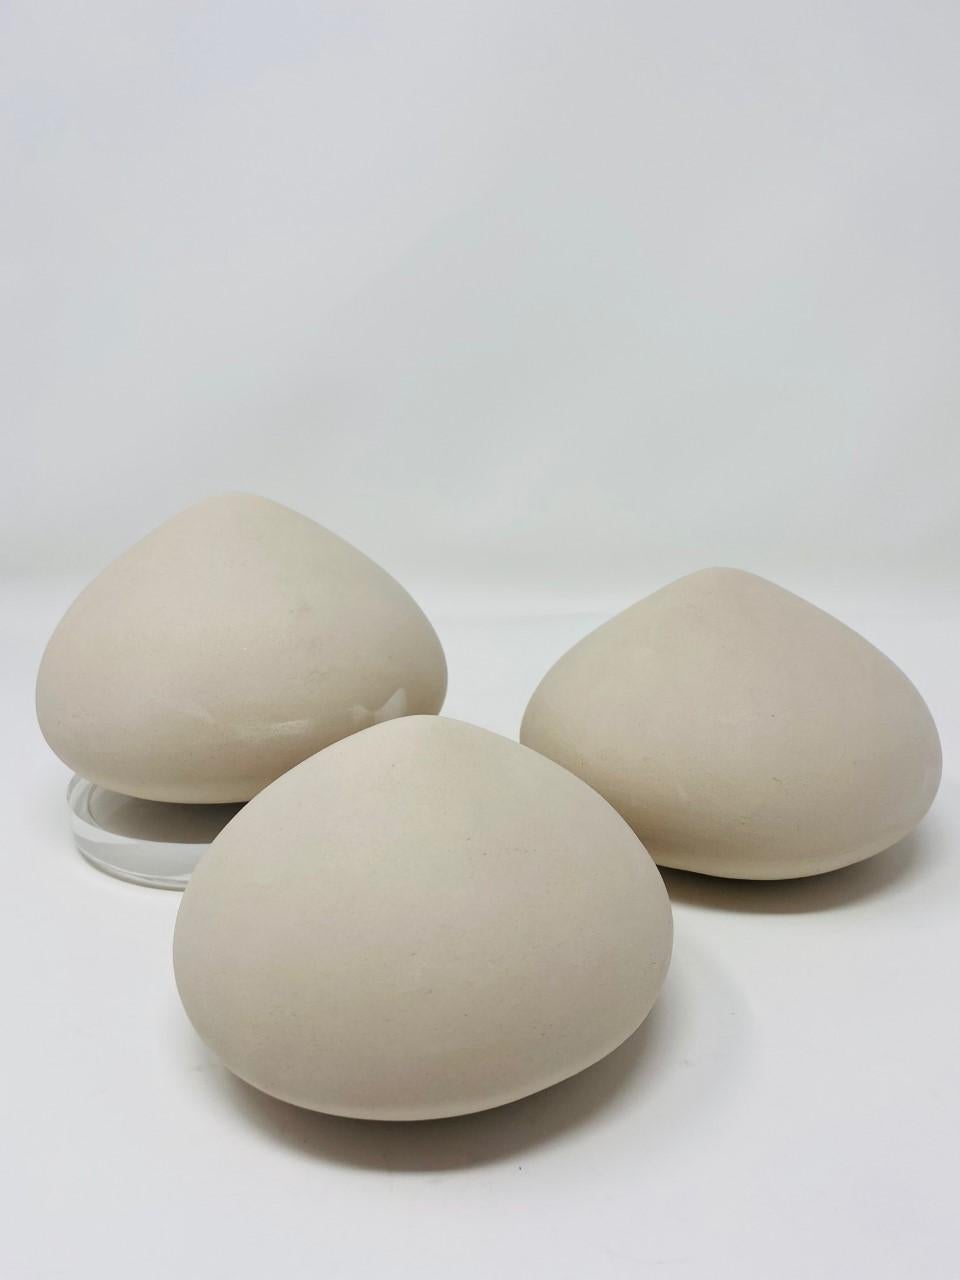 Late 20th Century Minimalist Abstract Cocoon Shaped Ceramic Sculptures by Artist Judith Pike 1990s For Sale